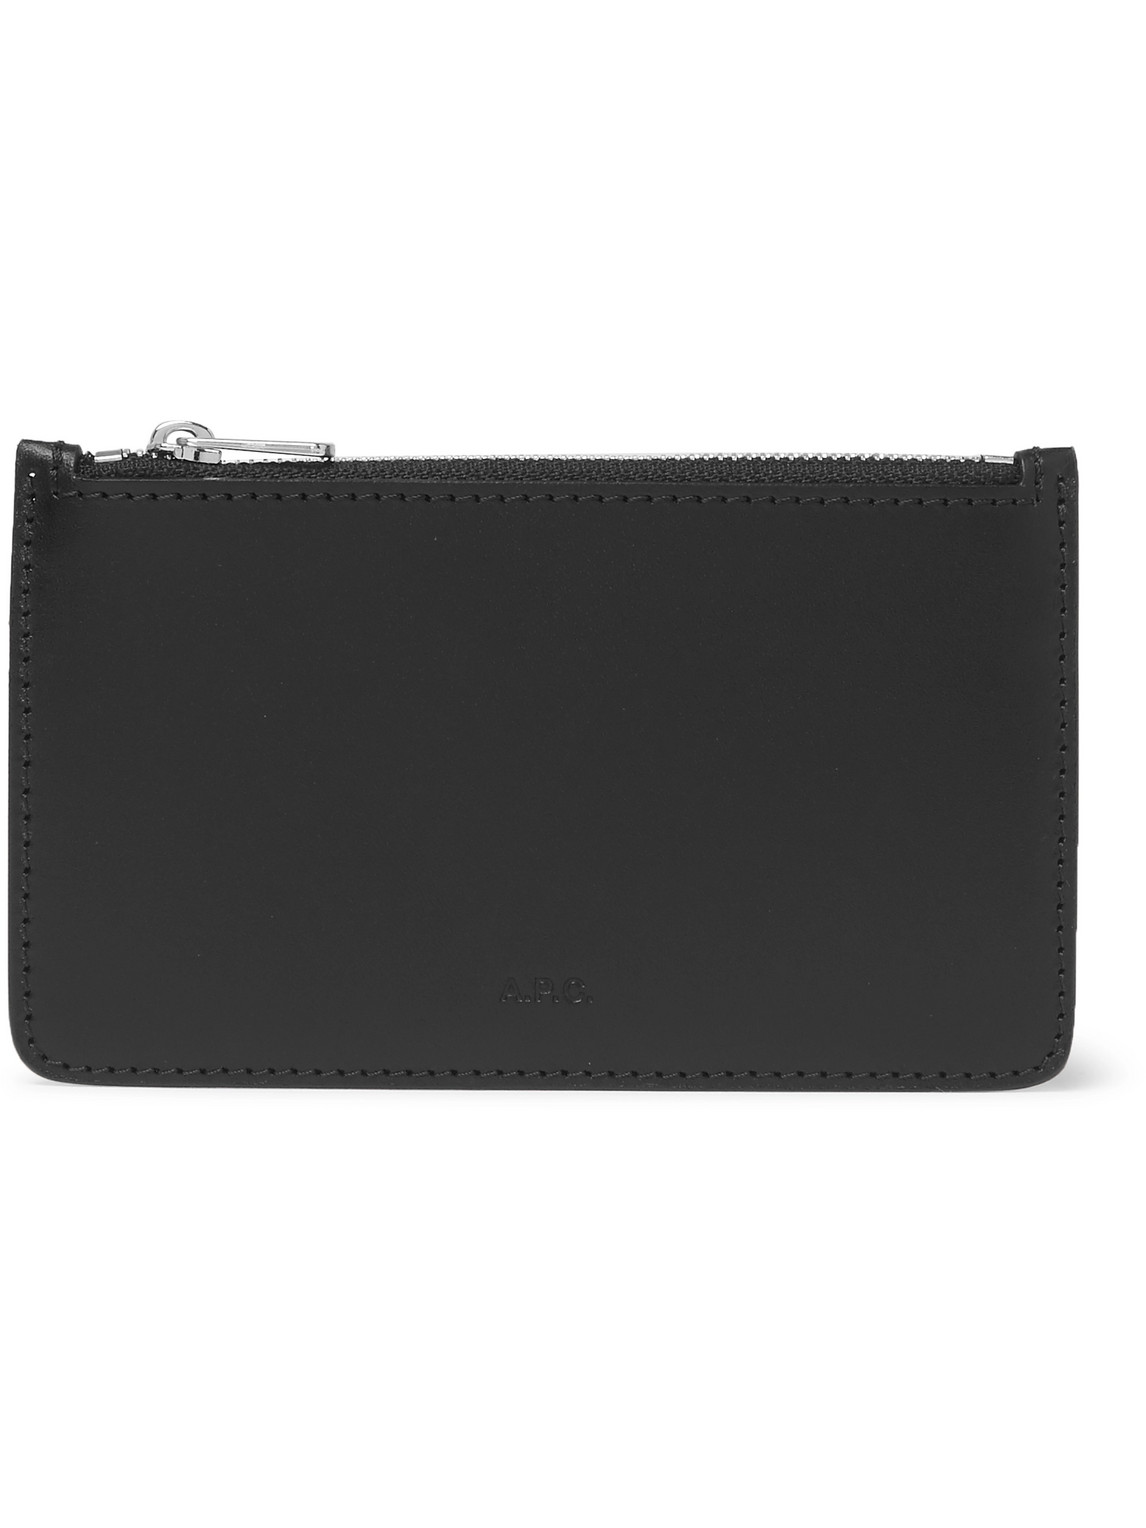 A.p.c. Walter Leather Zipped Cardholder In Black